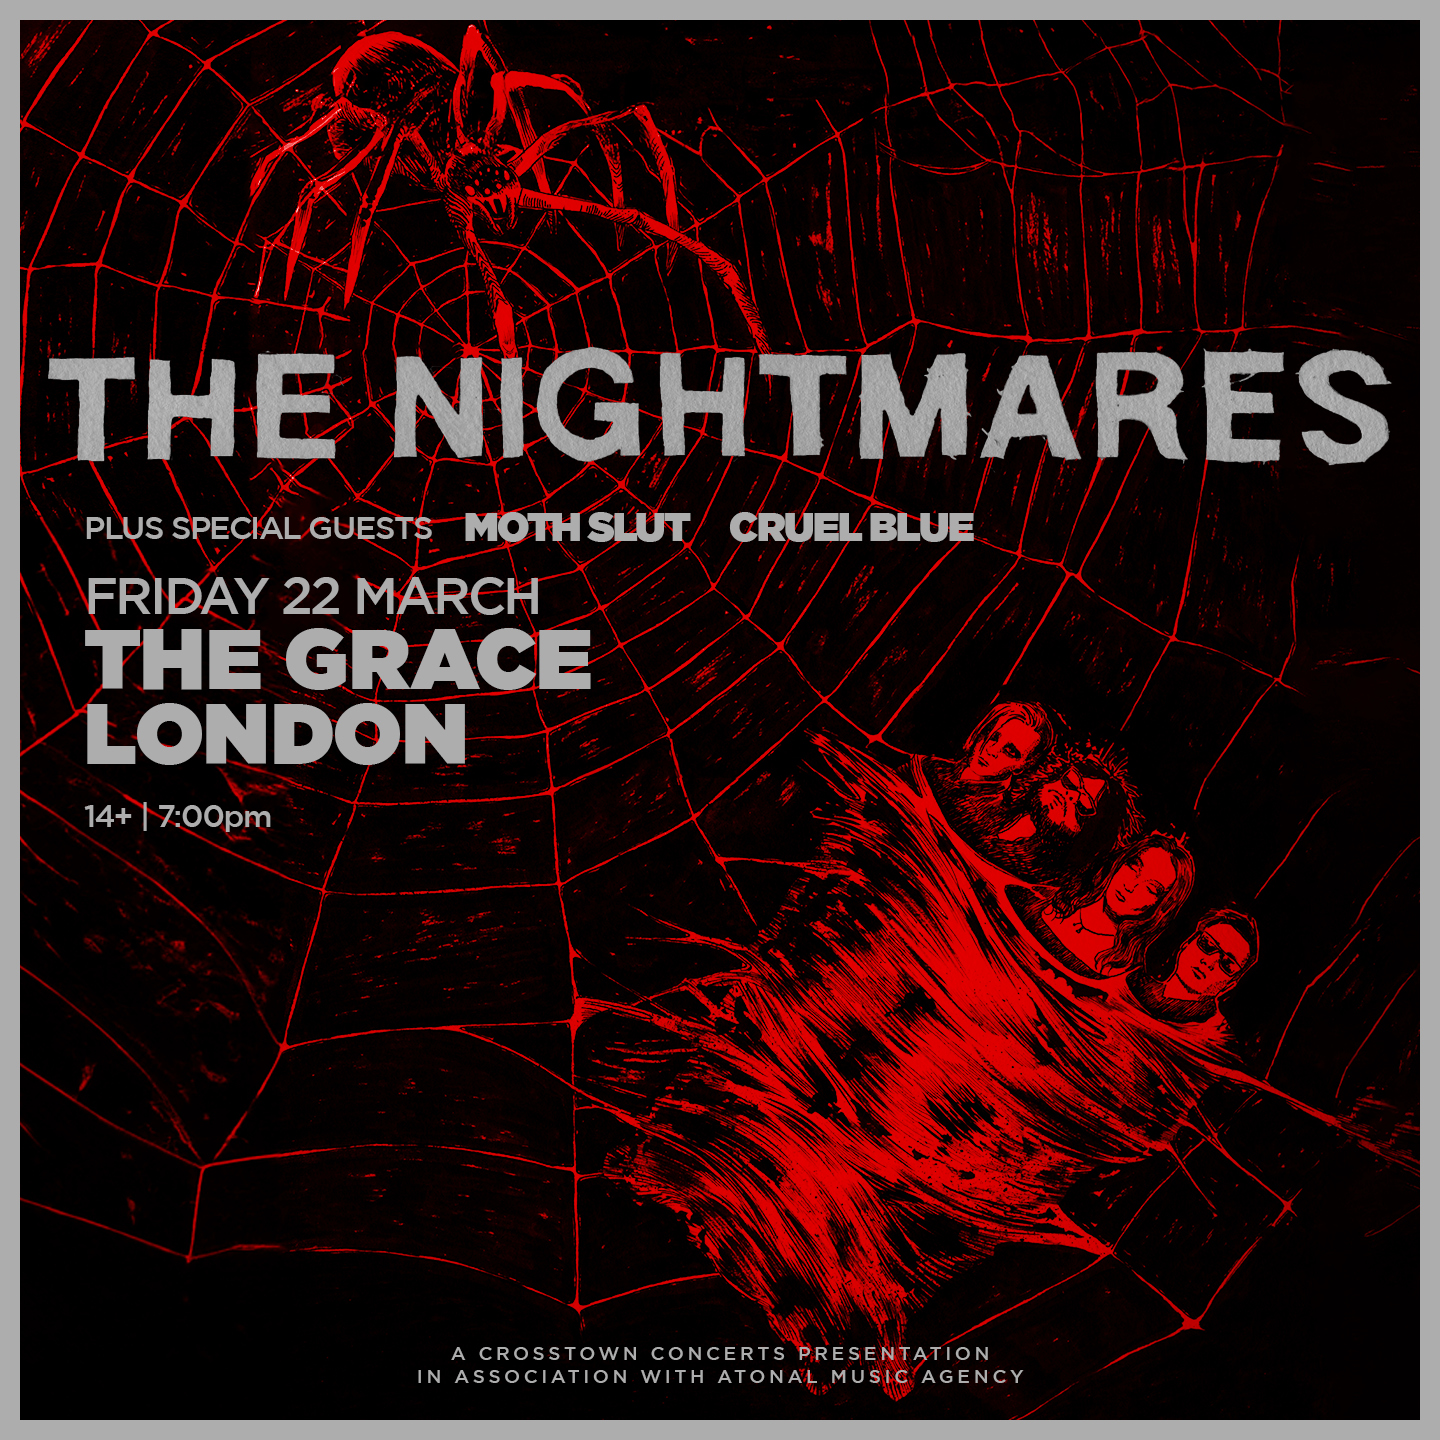 THE NIGHTMARES POSTER